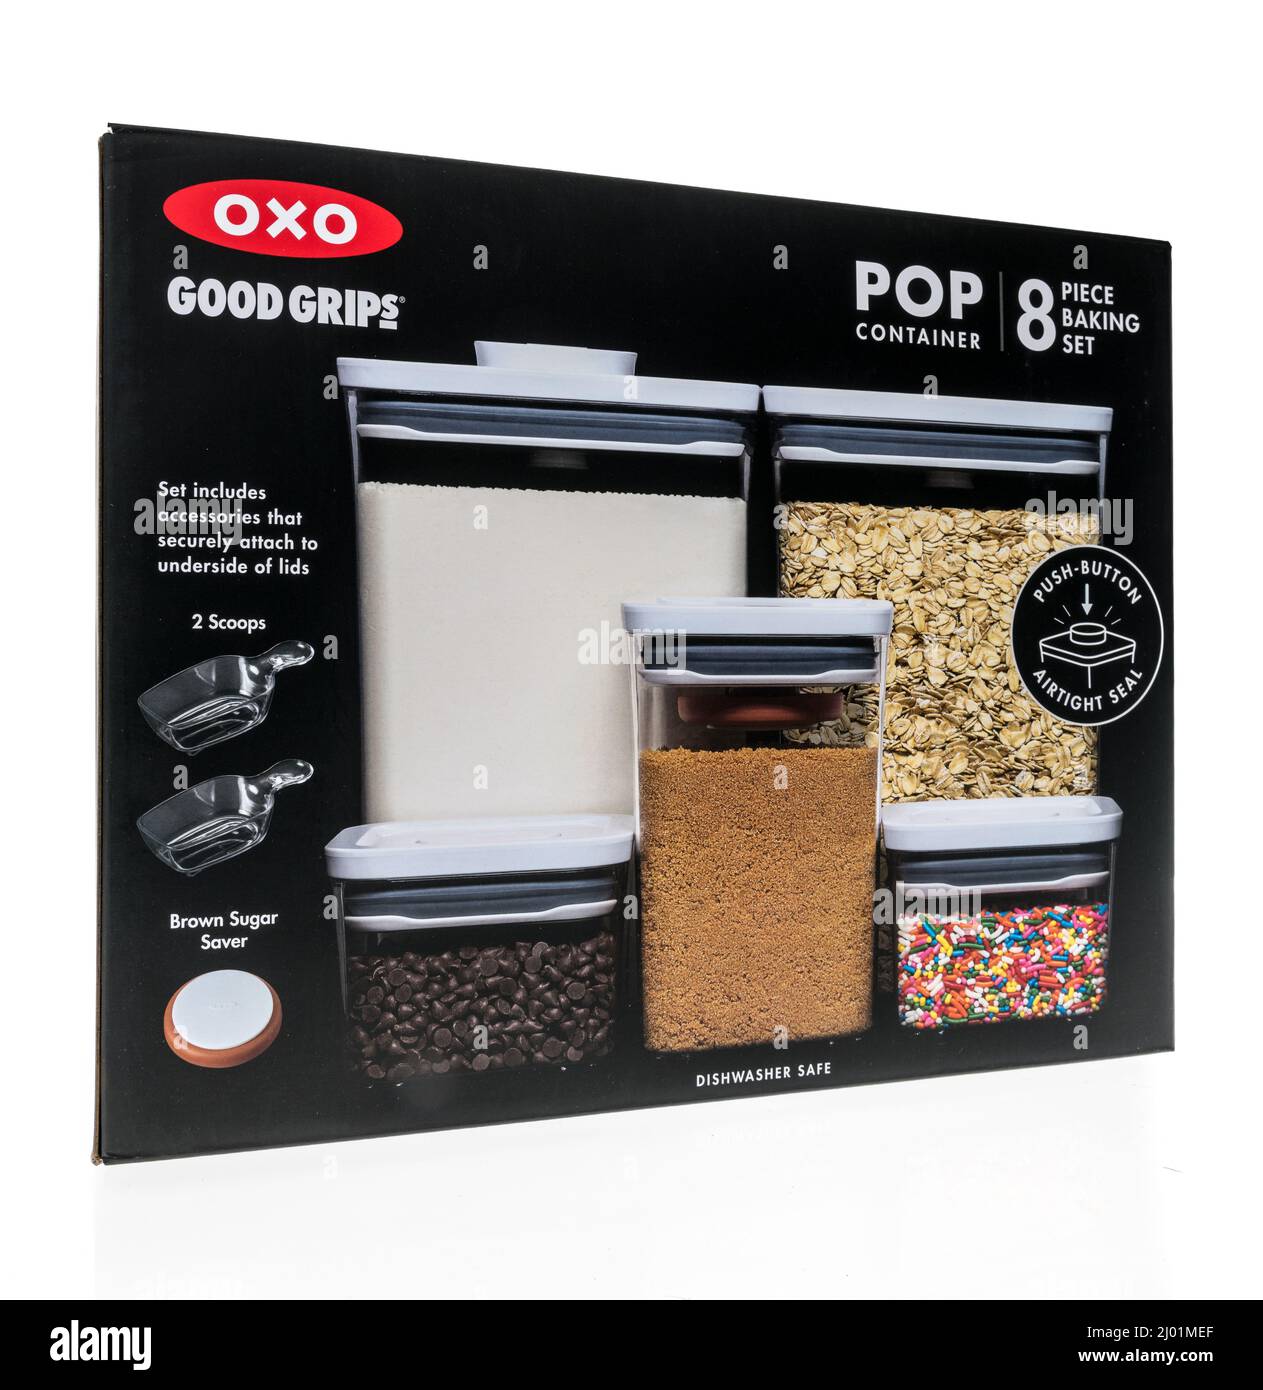 https://c8.alamy.com/comp/2J01MEF/winneconne-wi-1-march-2021-a-package-of-oxo-good-grips-pop-container-baking-set-on-an-isolated-background-2J01MEF.jpg